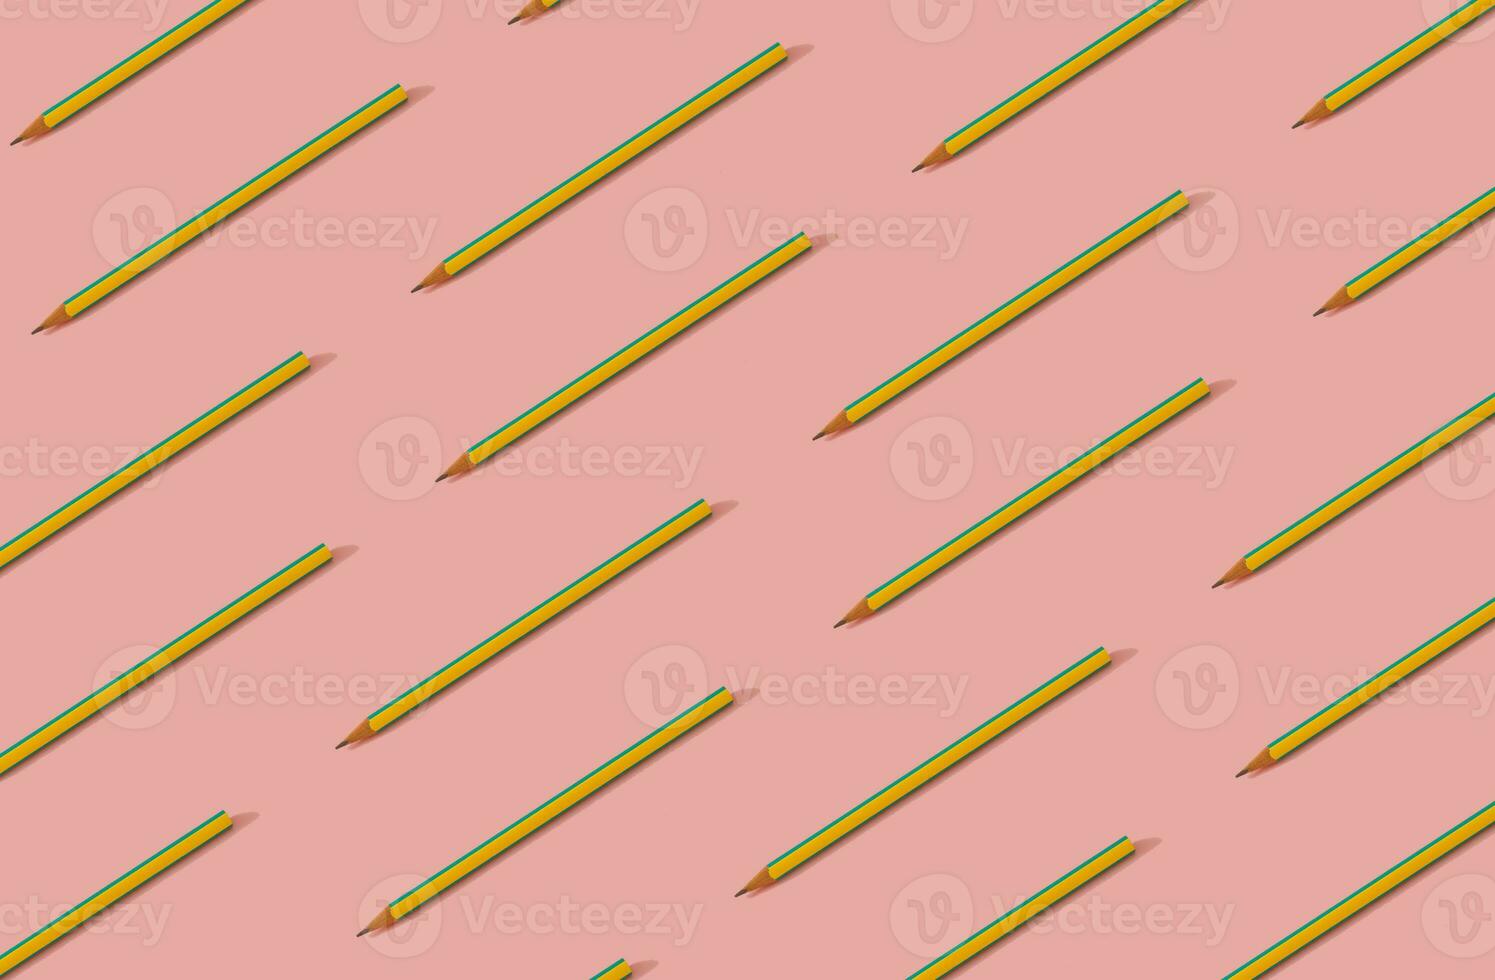 Back to school. Pattern composition of yellow and blue pencils on pastel pink background. Minimalist back to school concept. Trendy pencils pattern background. photo